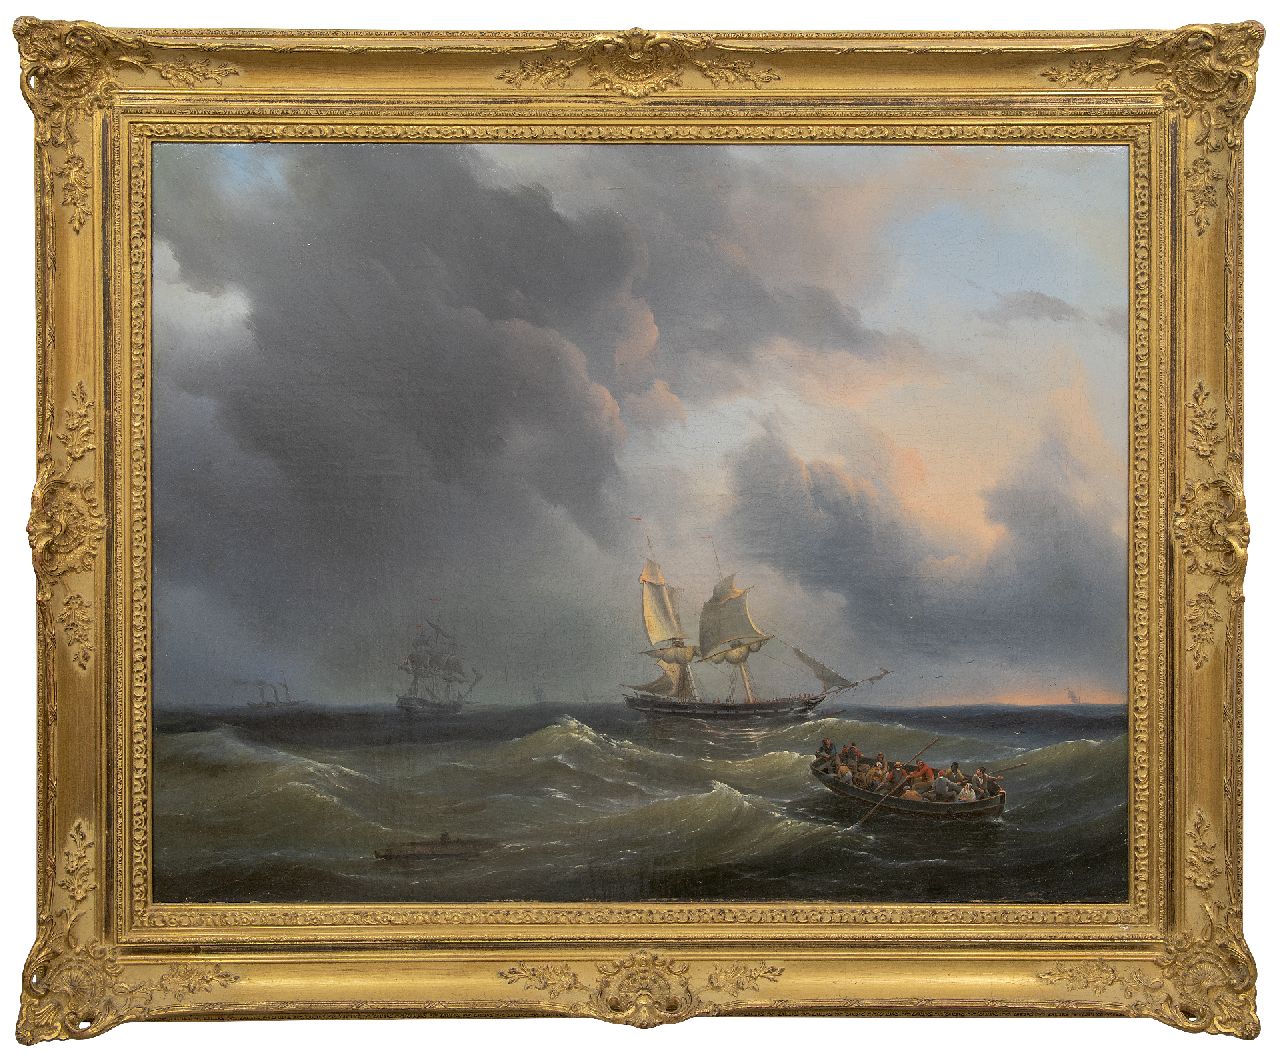 Thomas P.H.  | Pieter Hendrik Thomas | Paintings offered for sale | Schips on a choppy sea, oil on canvas 76.5 x 99.5 cm, signed l.l.